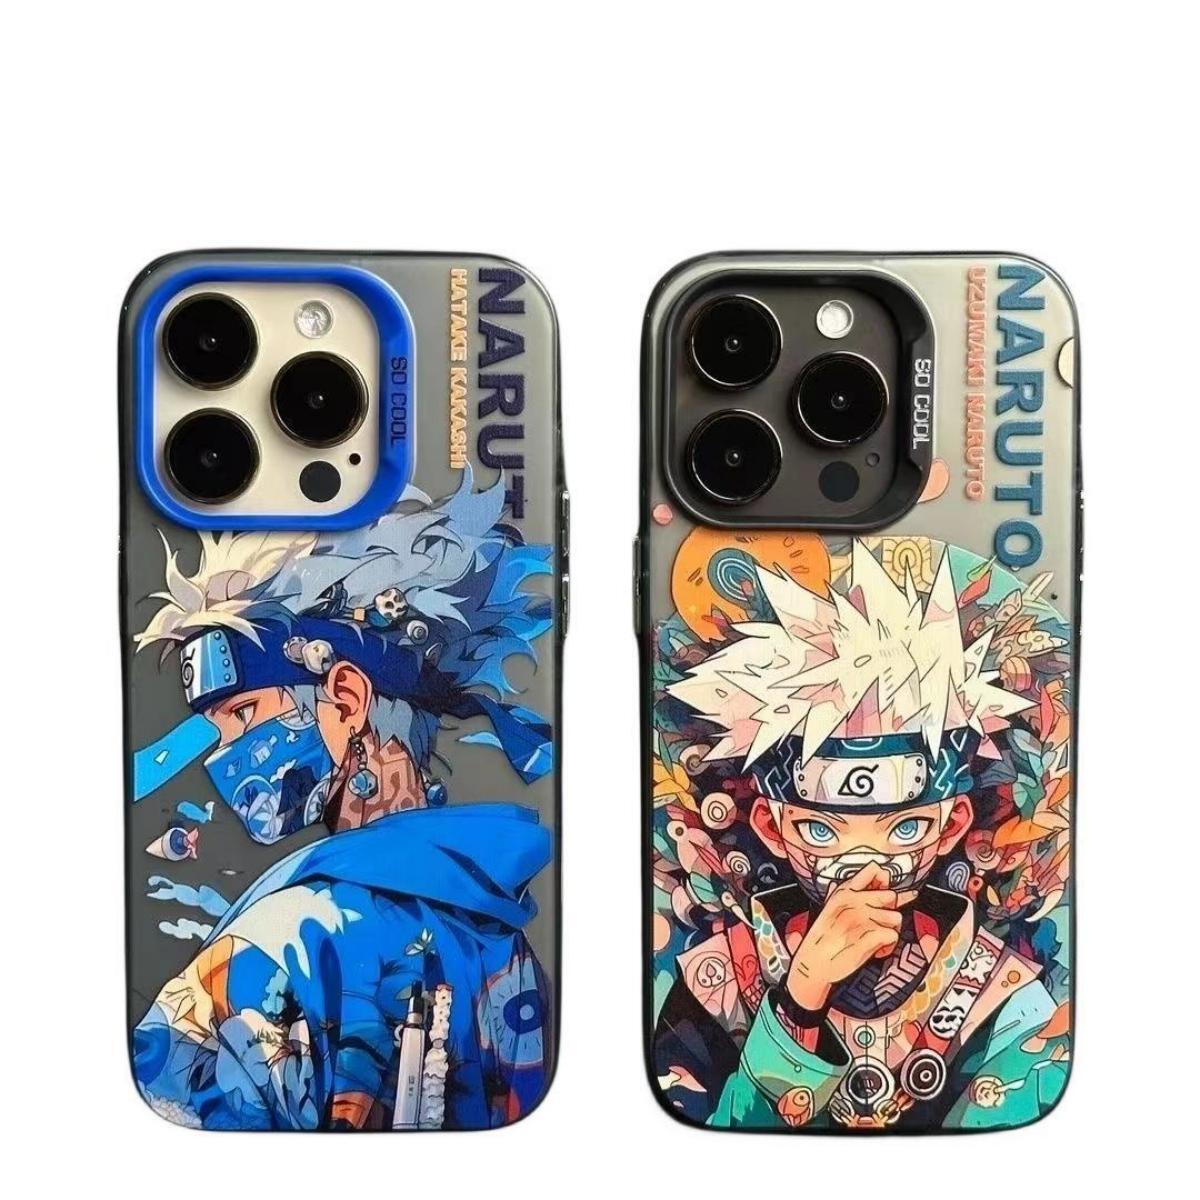 Popular mobile phone cases with classic anime characters such asNaruto, Kakashi, Haruno Sakura andso on make your mobile phone more eye-catching.